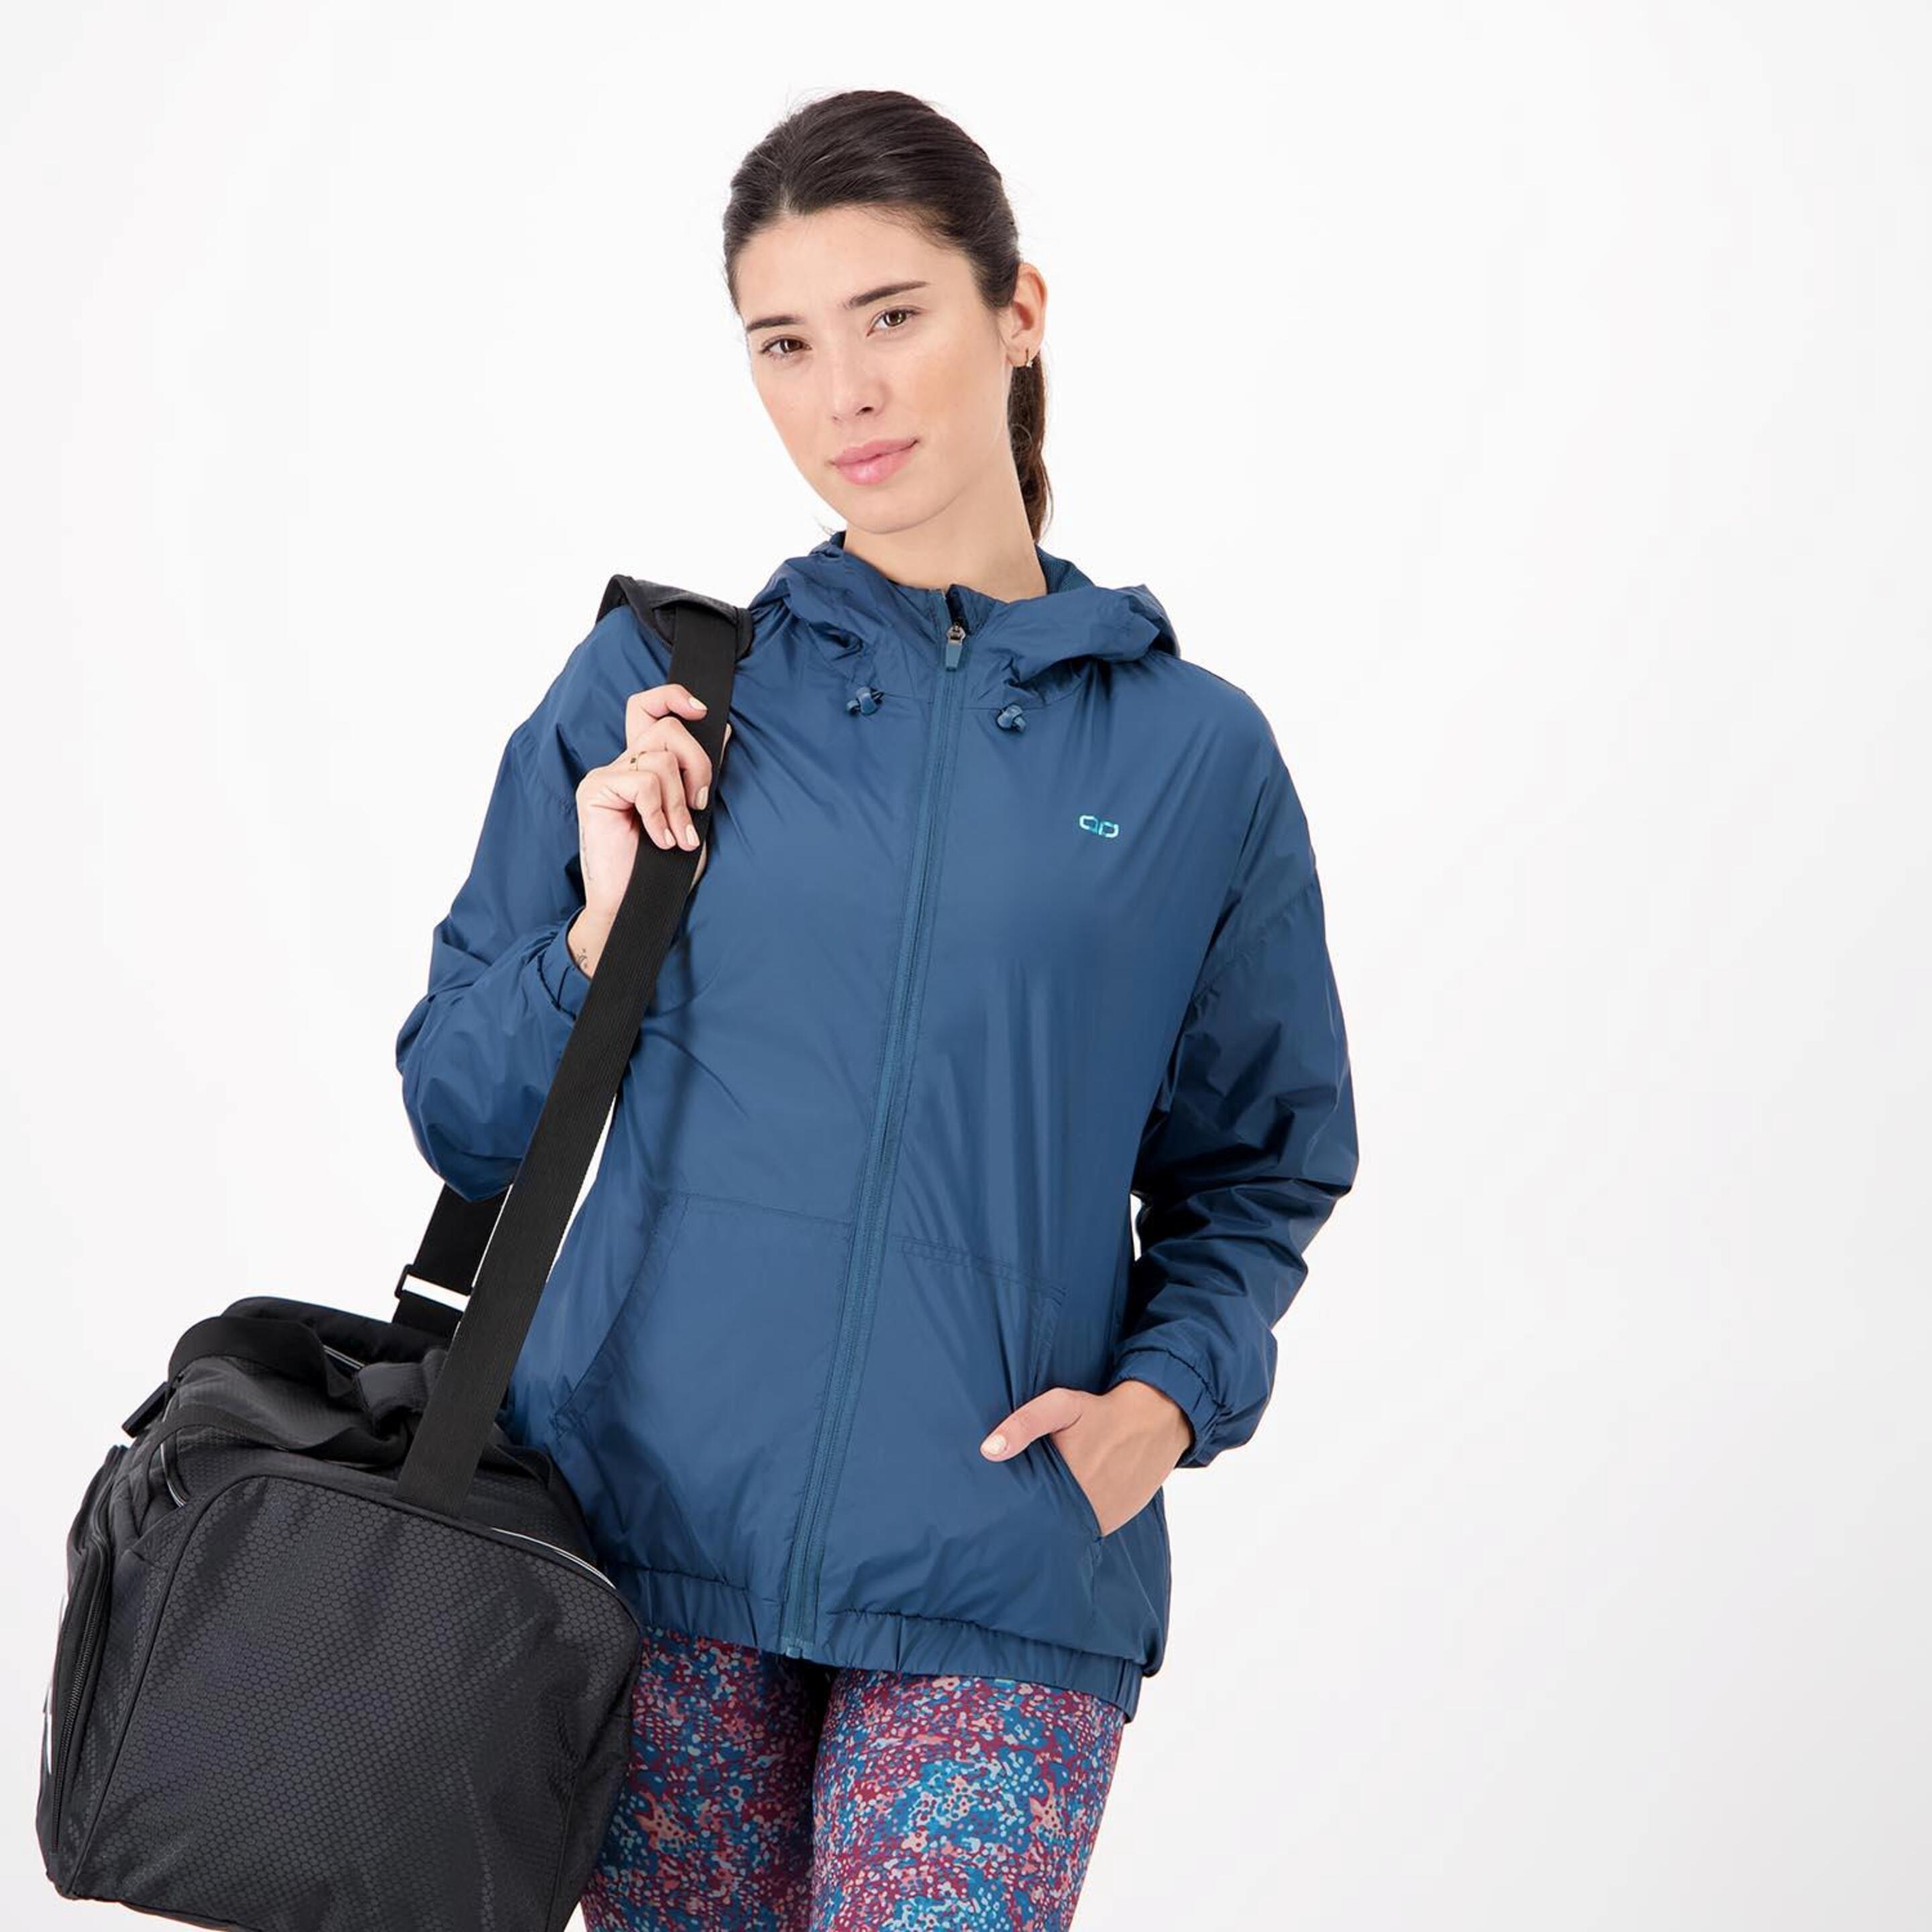 Doone Supportive - verde - Sudadera Fitness Mujer